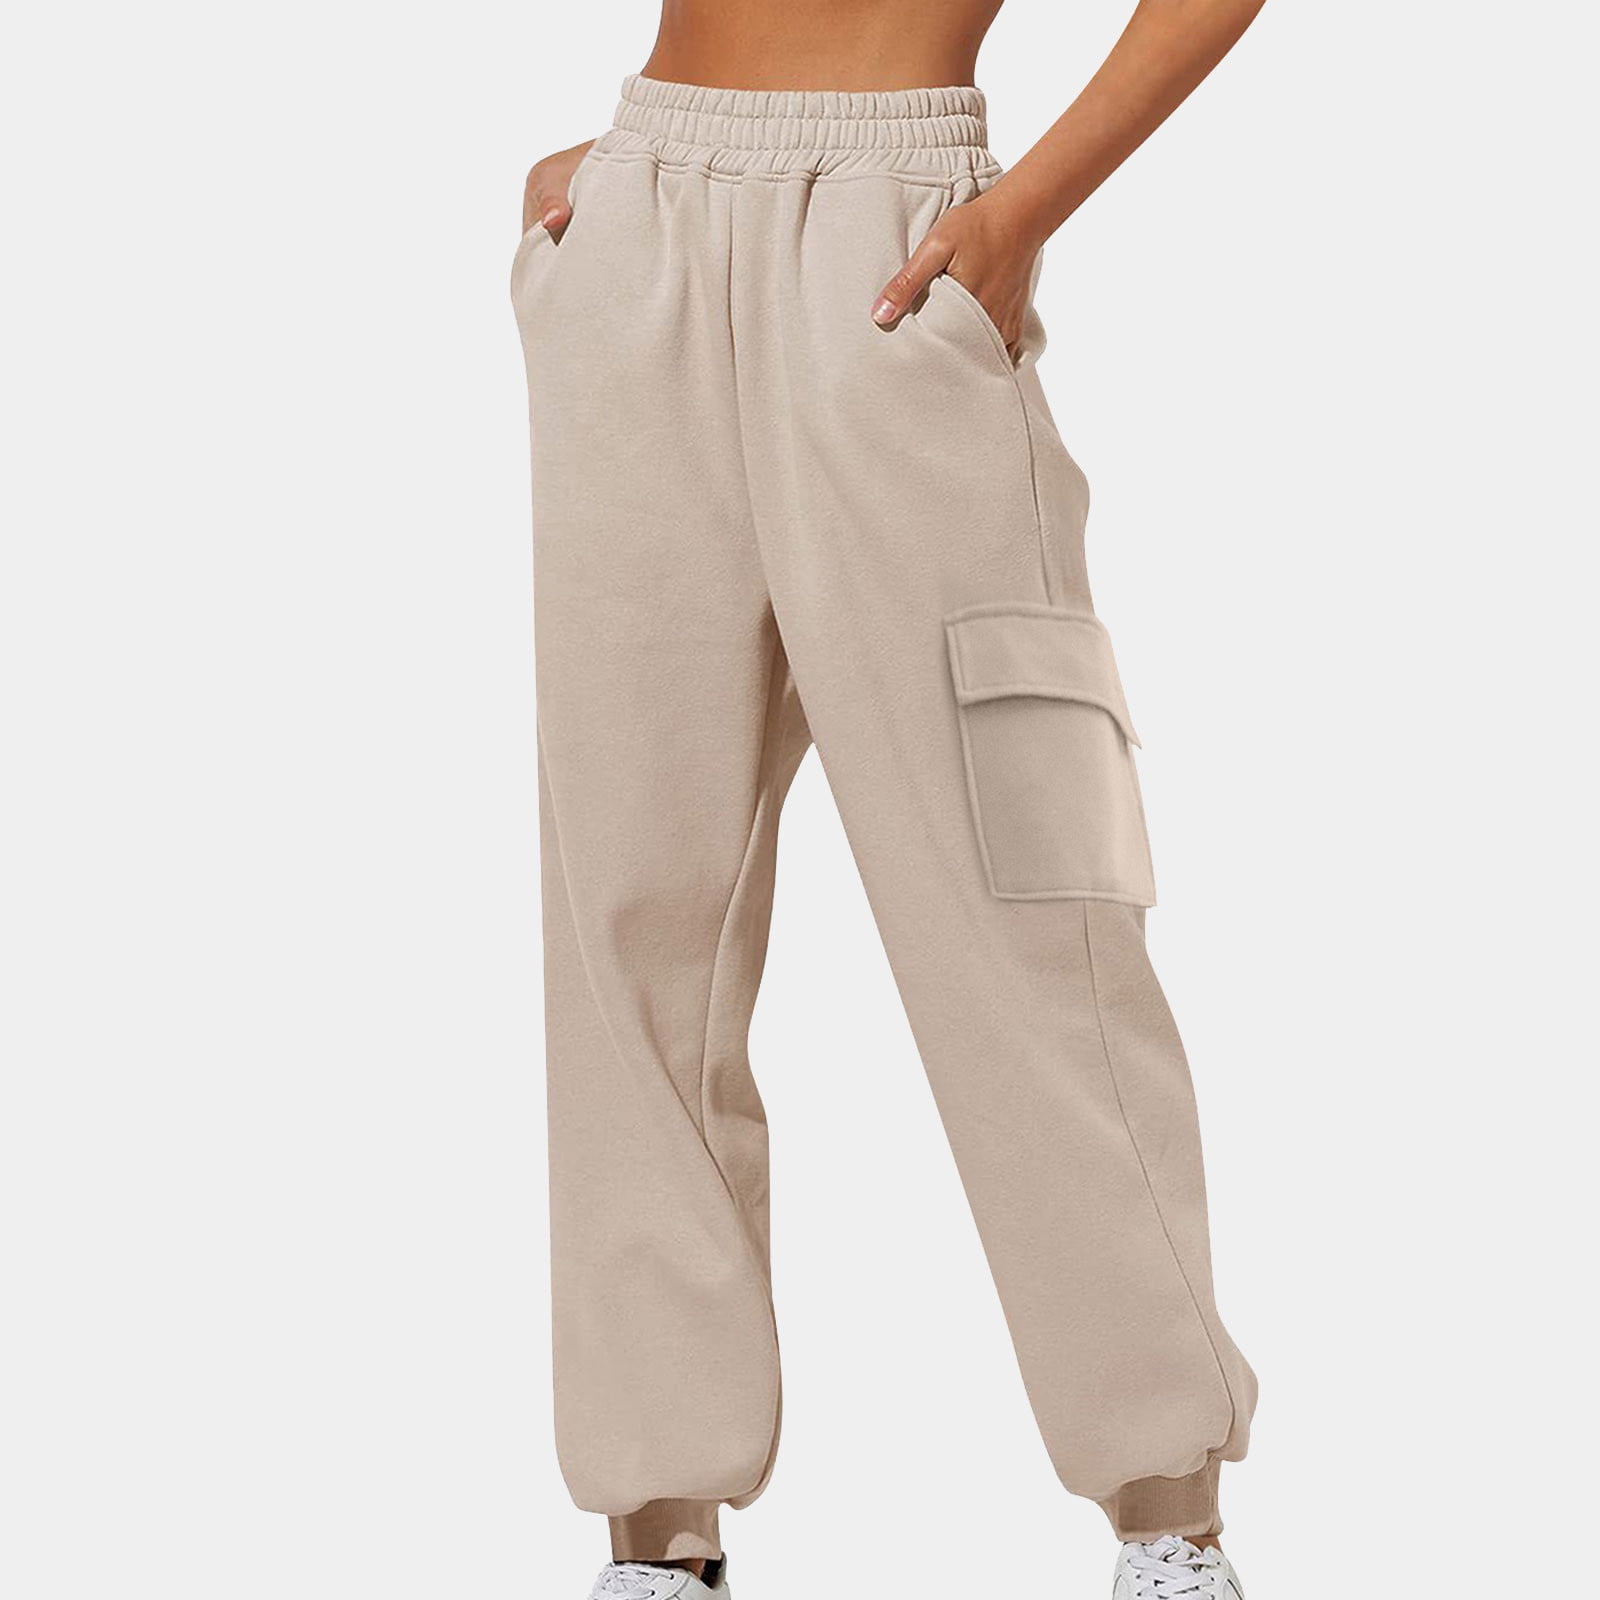  Womens Cargo Sweatpants Casual Baggy Fleece Fall Winter  Sweatpants High Waisted Outdoor Joggers Pants with Pockets Beige :  Clothing, Shoes & Jewelry